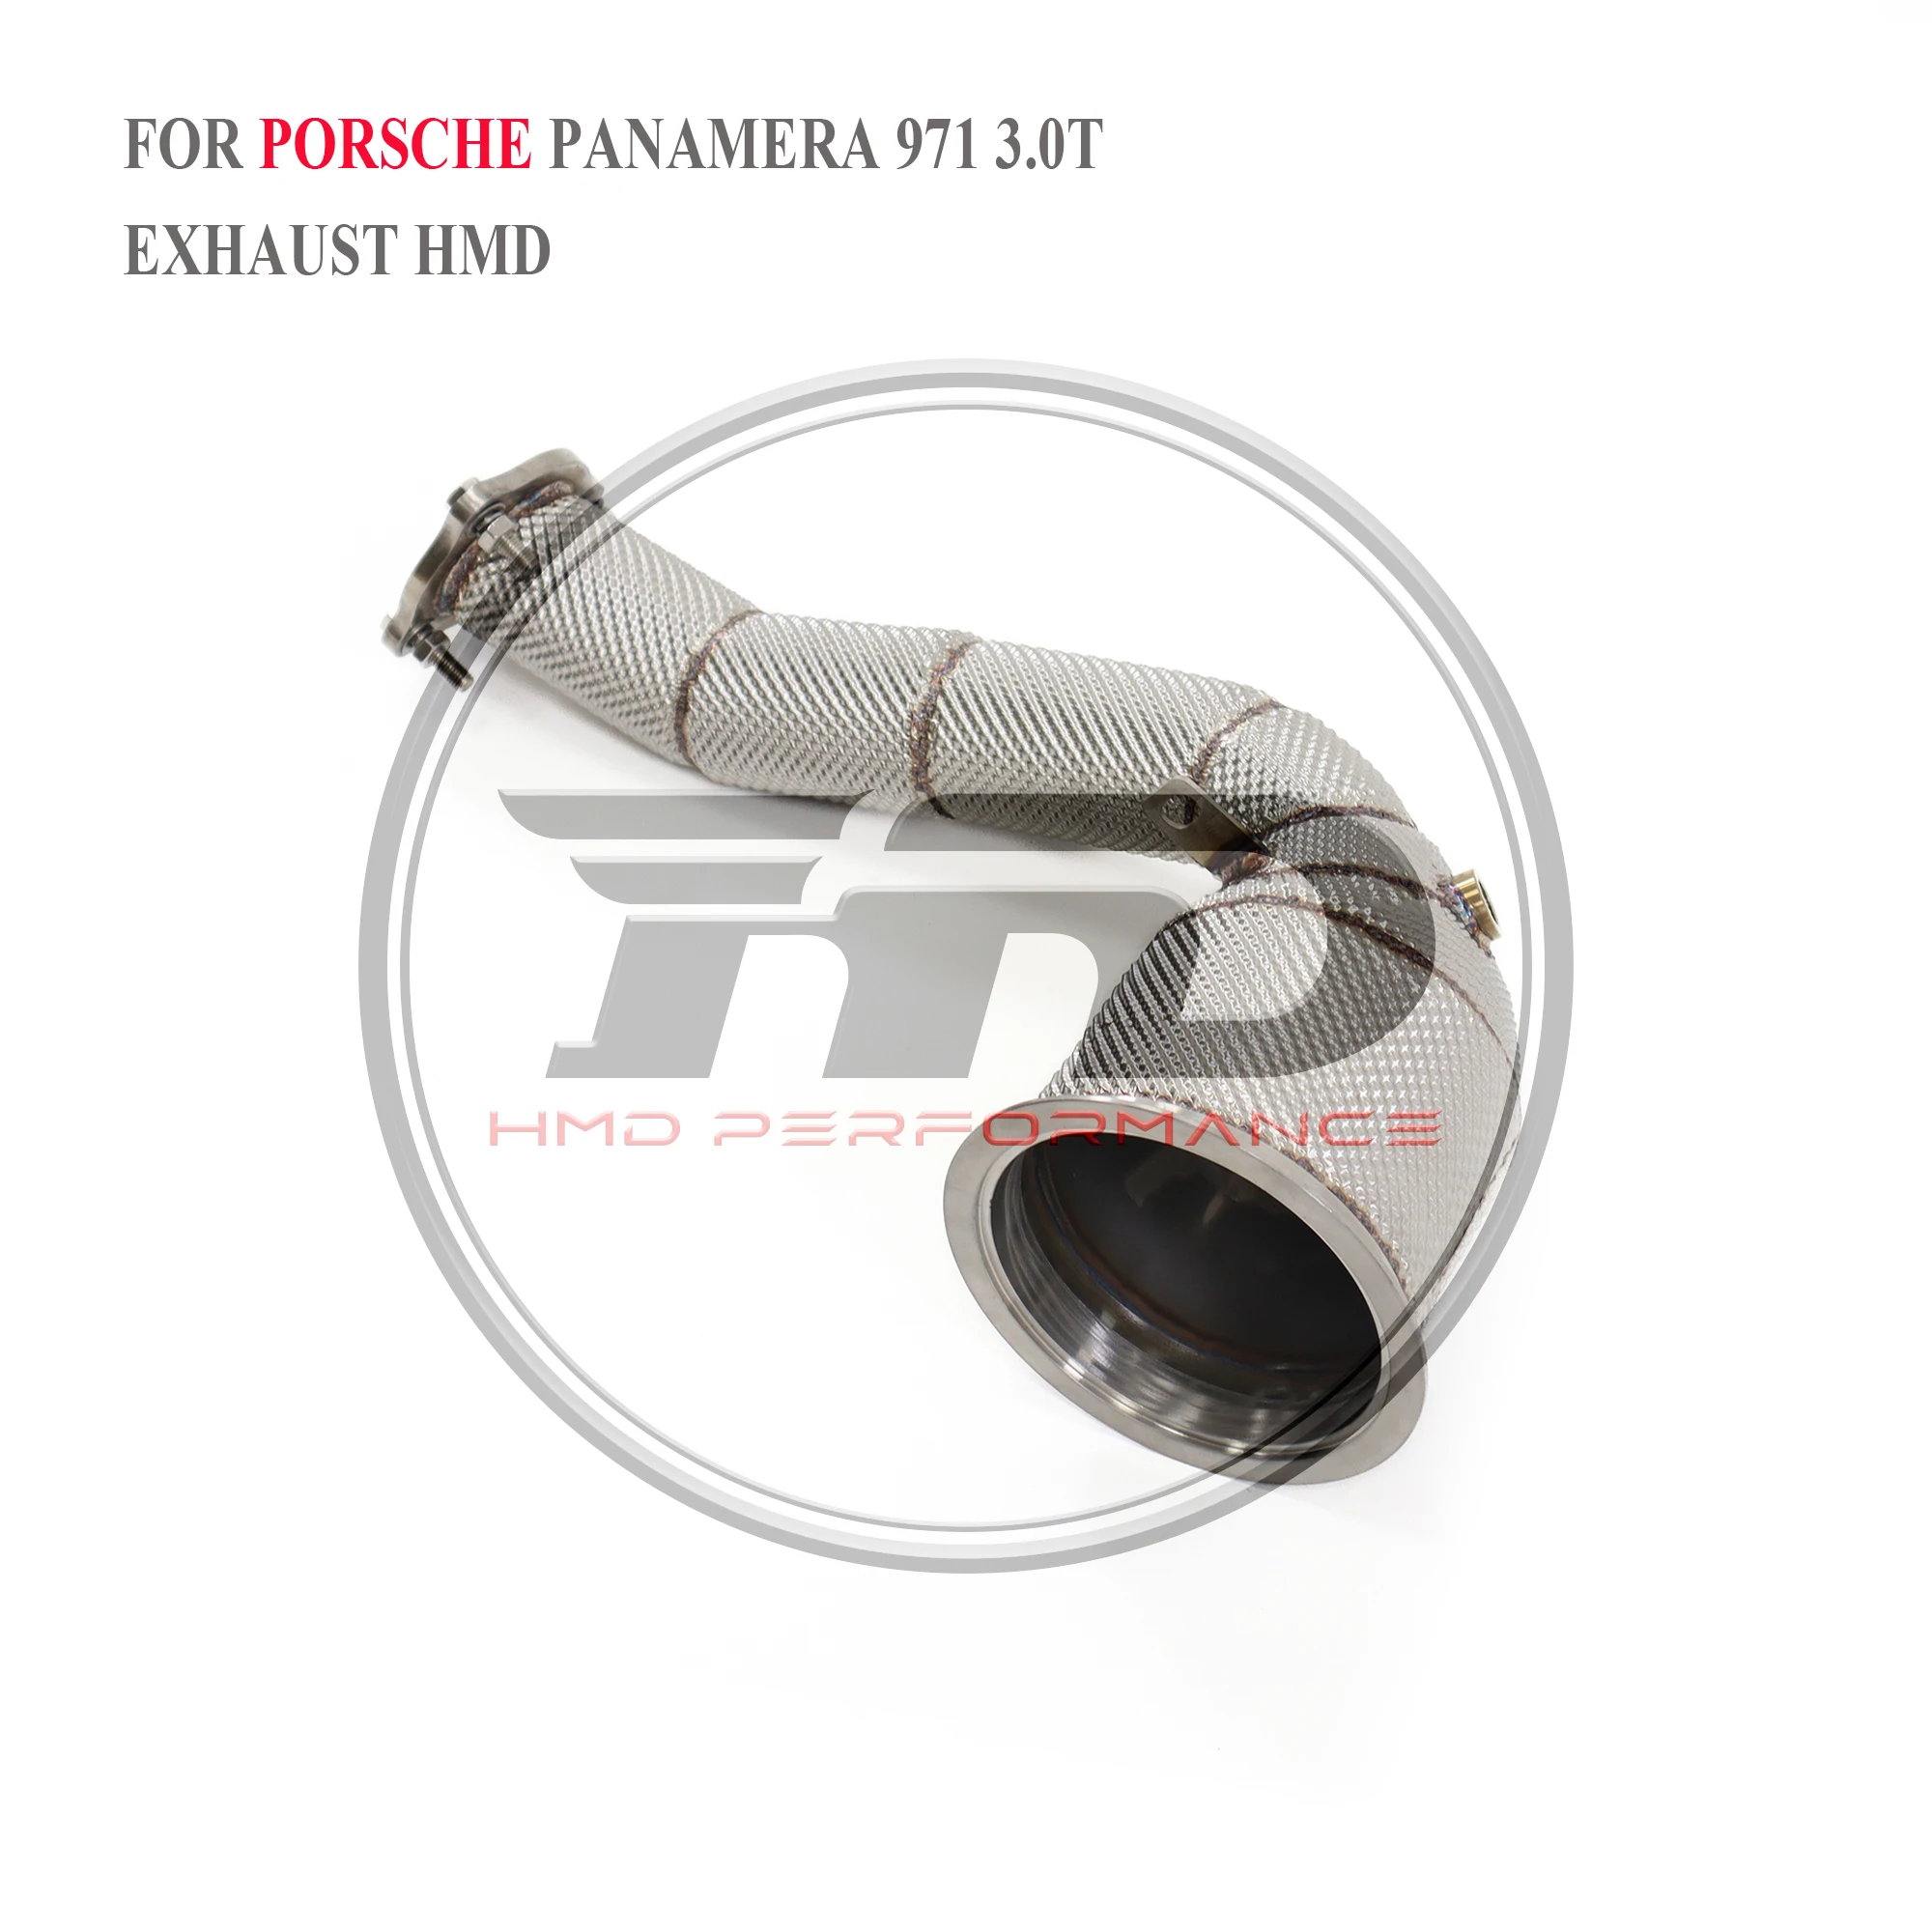 

HMD Exhaust System High Flow Performance Downpipe for Porsche Panamera 971 3.0T With Heat Shield Racing Pipe